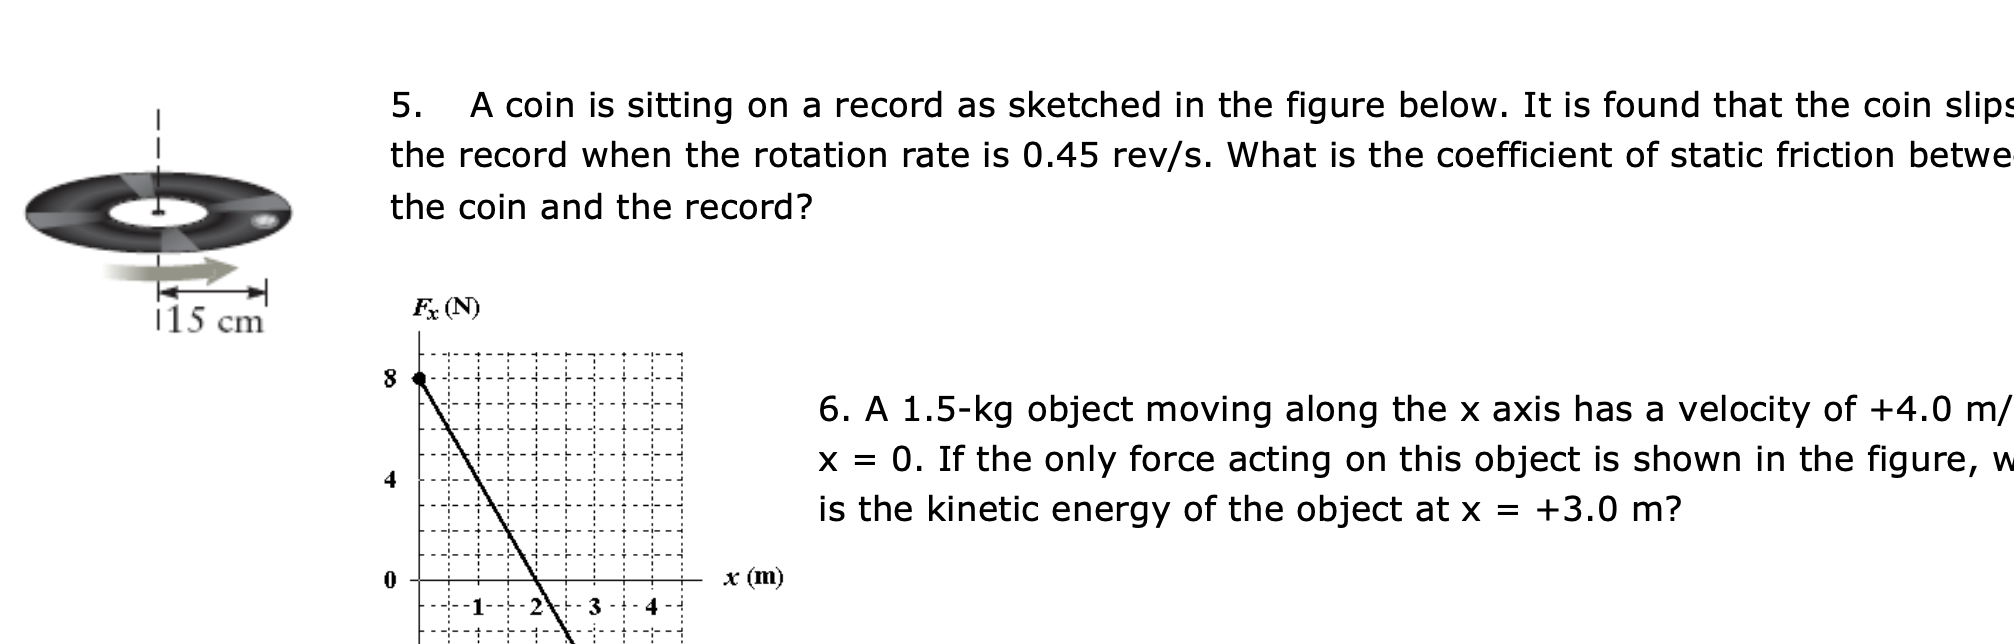 A coin is sitting on a record as sketched in the figure below. It is found that the coin slip
the record when the rotation rate is 0.45 rev/s. What is the coefficient of static friction betwe
5.
the coin and the record?
115 cm
Fx (N)
6. A 1.5-kg object moving along the x axis has a velocity of +4.0 m/
x = 0. If the only force acting on this object is shown in the figure, w
is the kinetic energy of the object at x
+3.0 m?
x (m)
